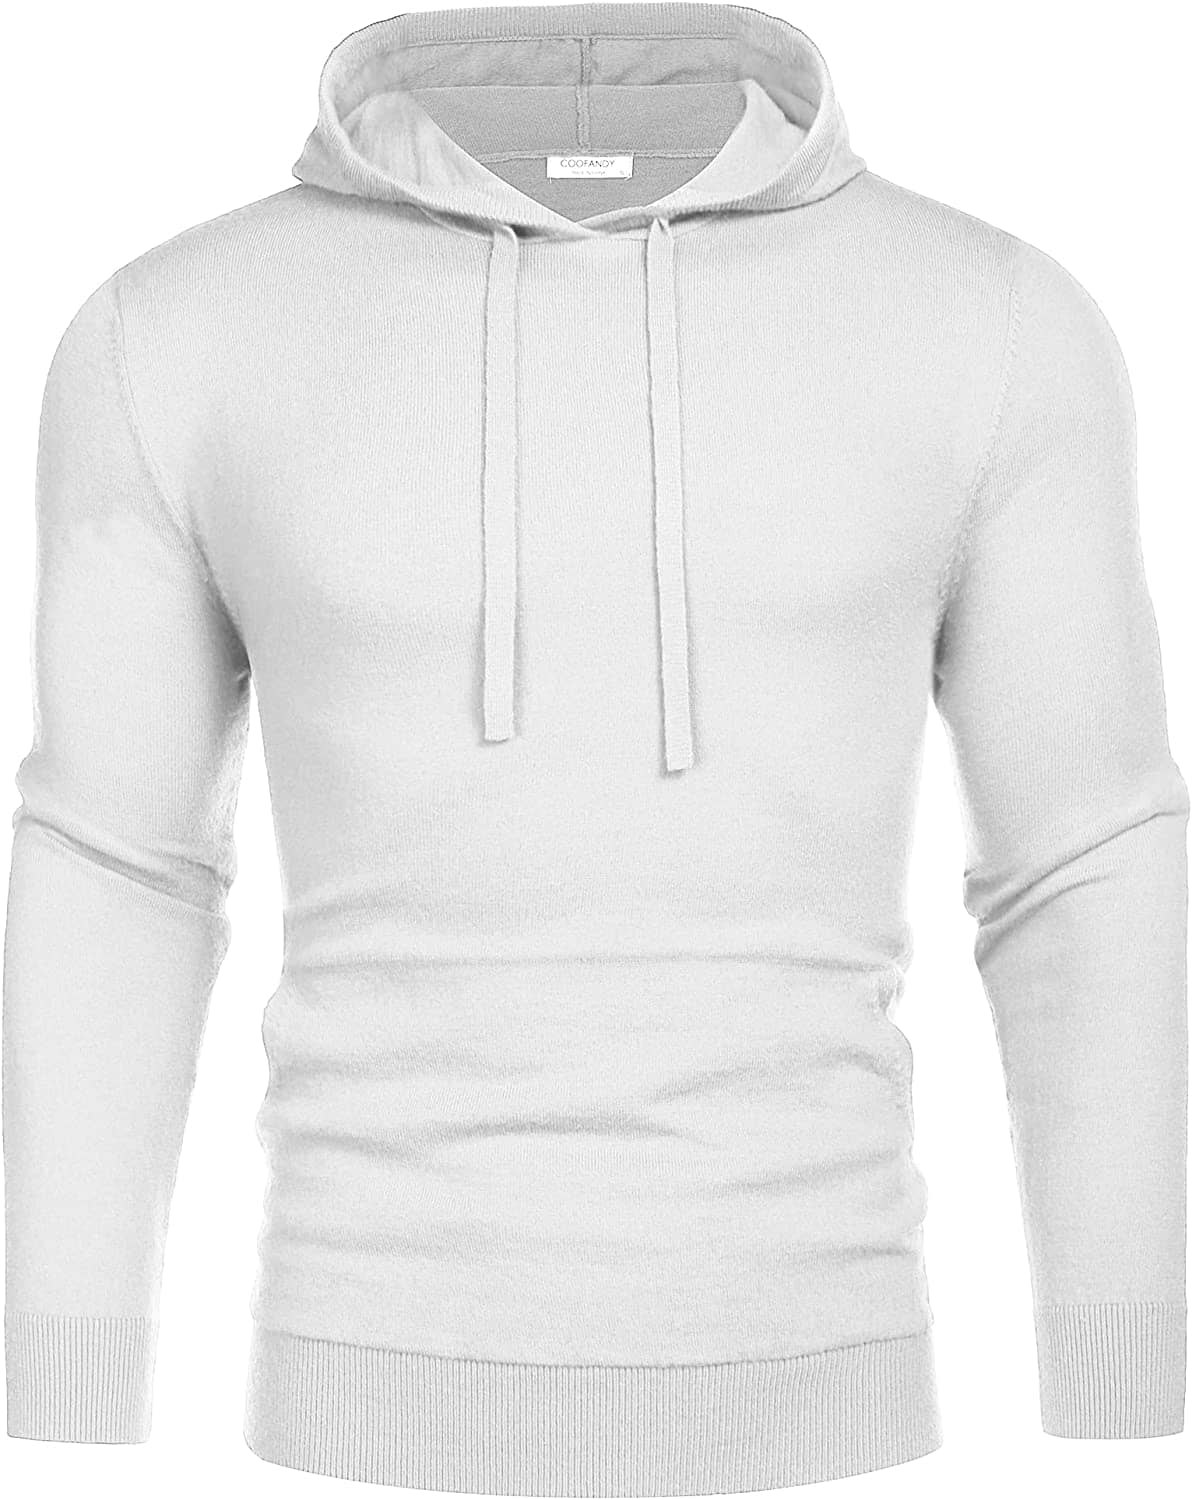 Long Sleeve Knitted Pullover Hooded Sweater (US Only) Hoodies Coofandy's White S 